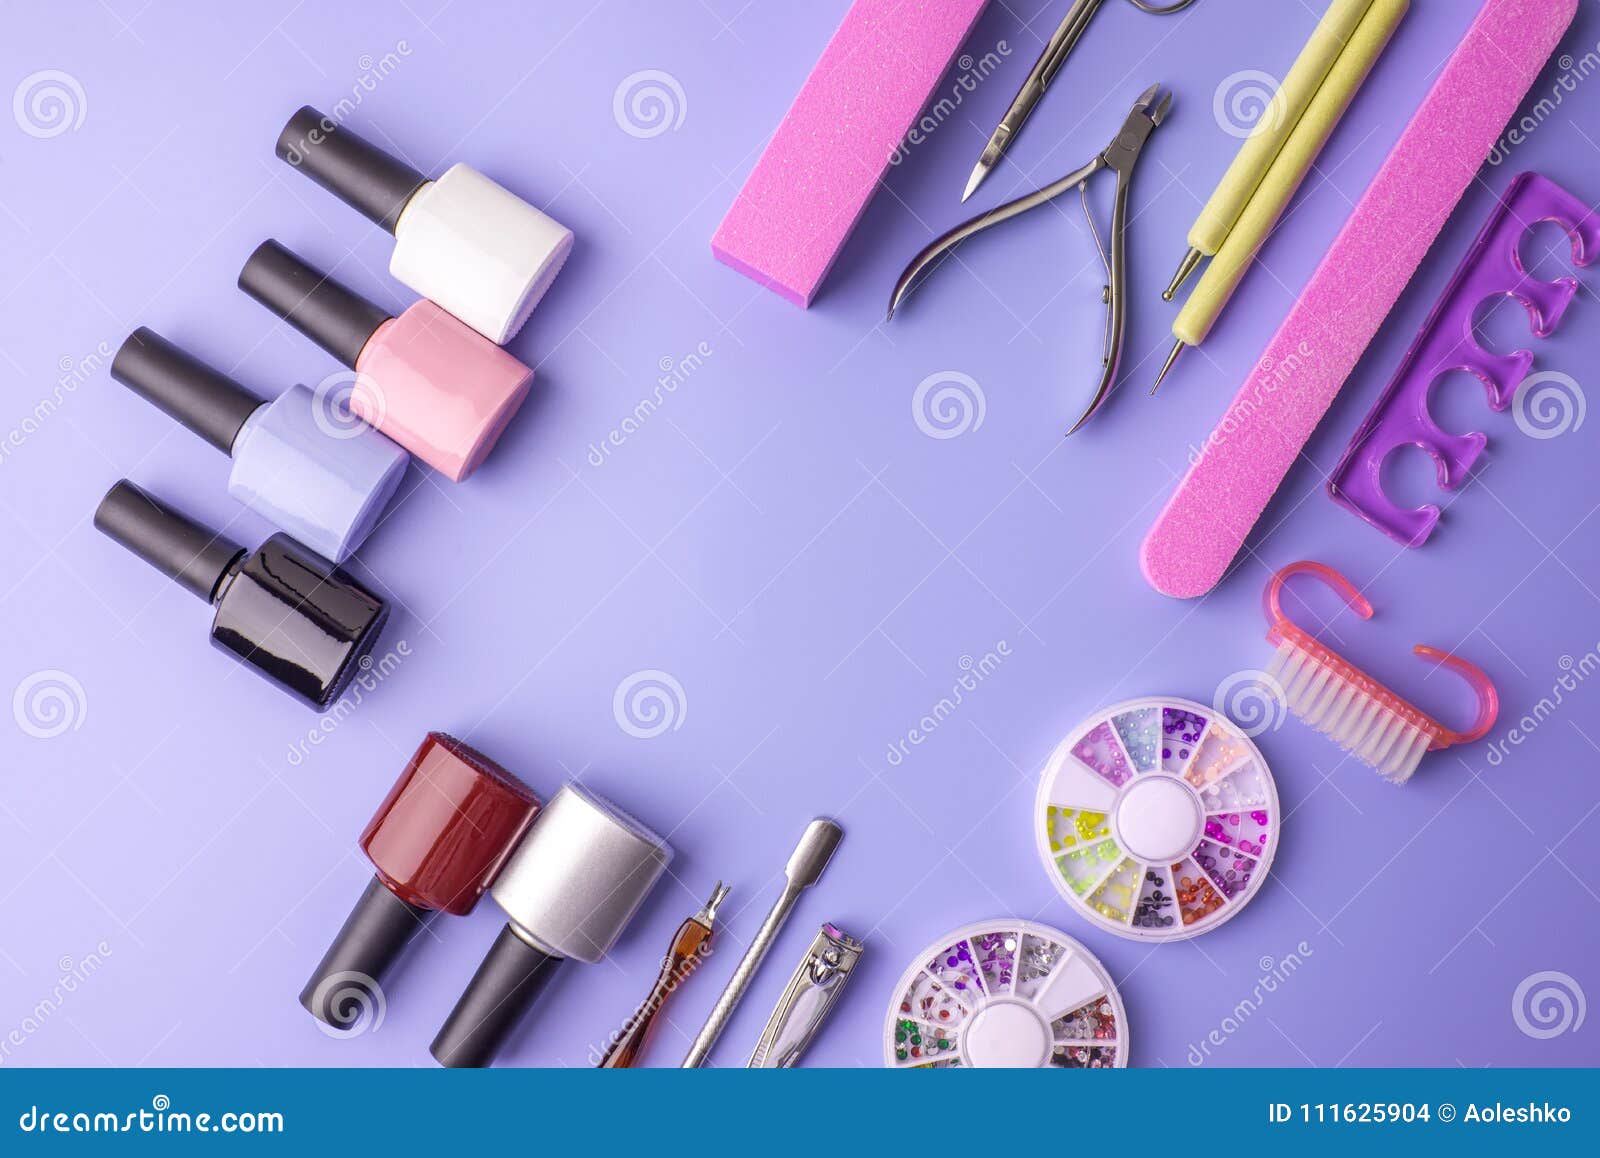 Set of Cosmetic Tools for Manicure and Pedicure on a Purple Background ...